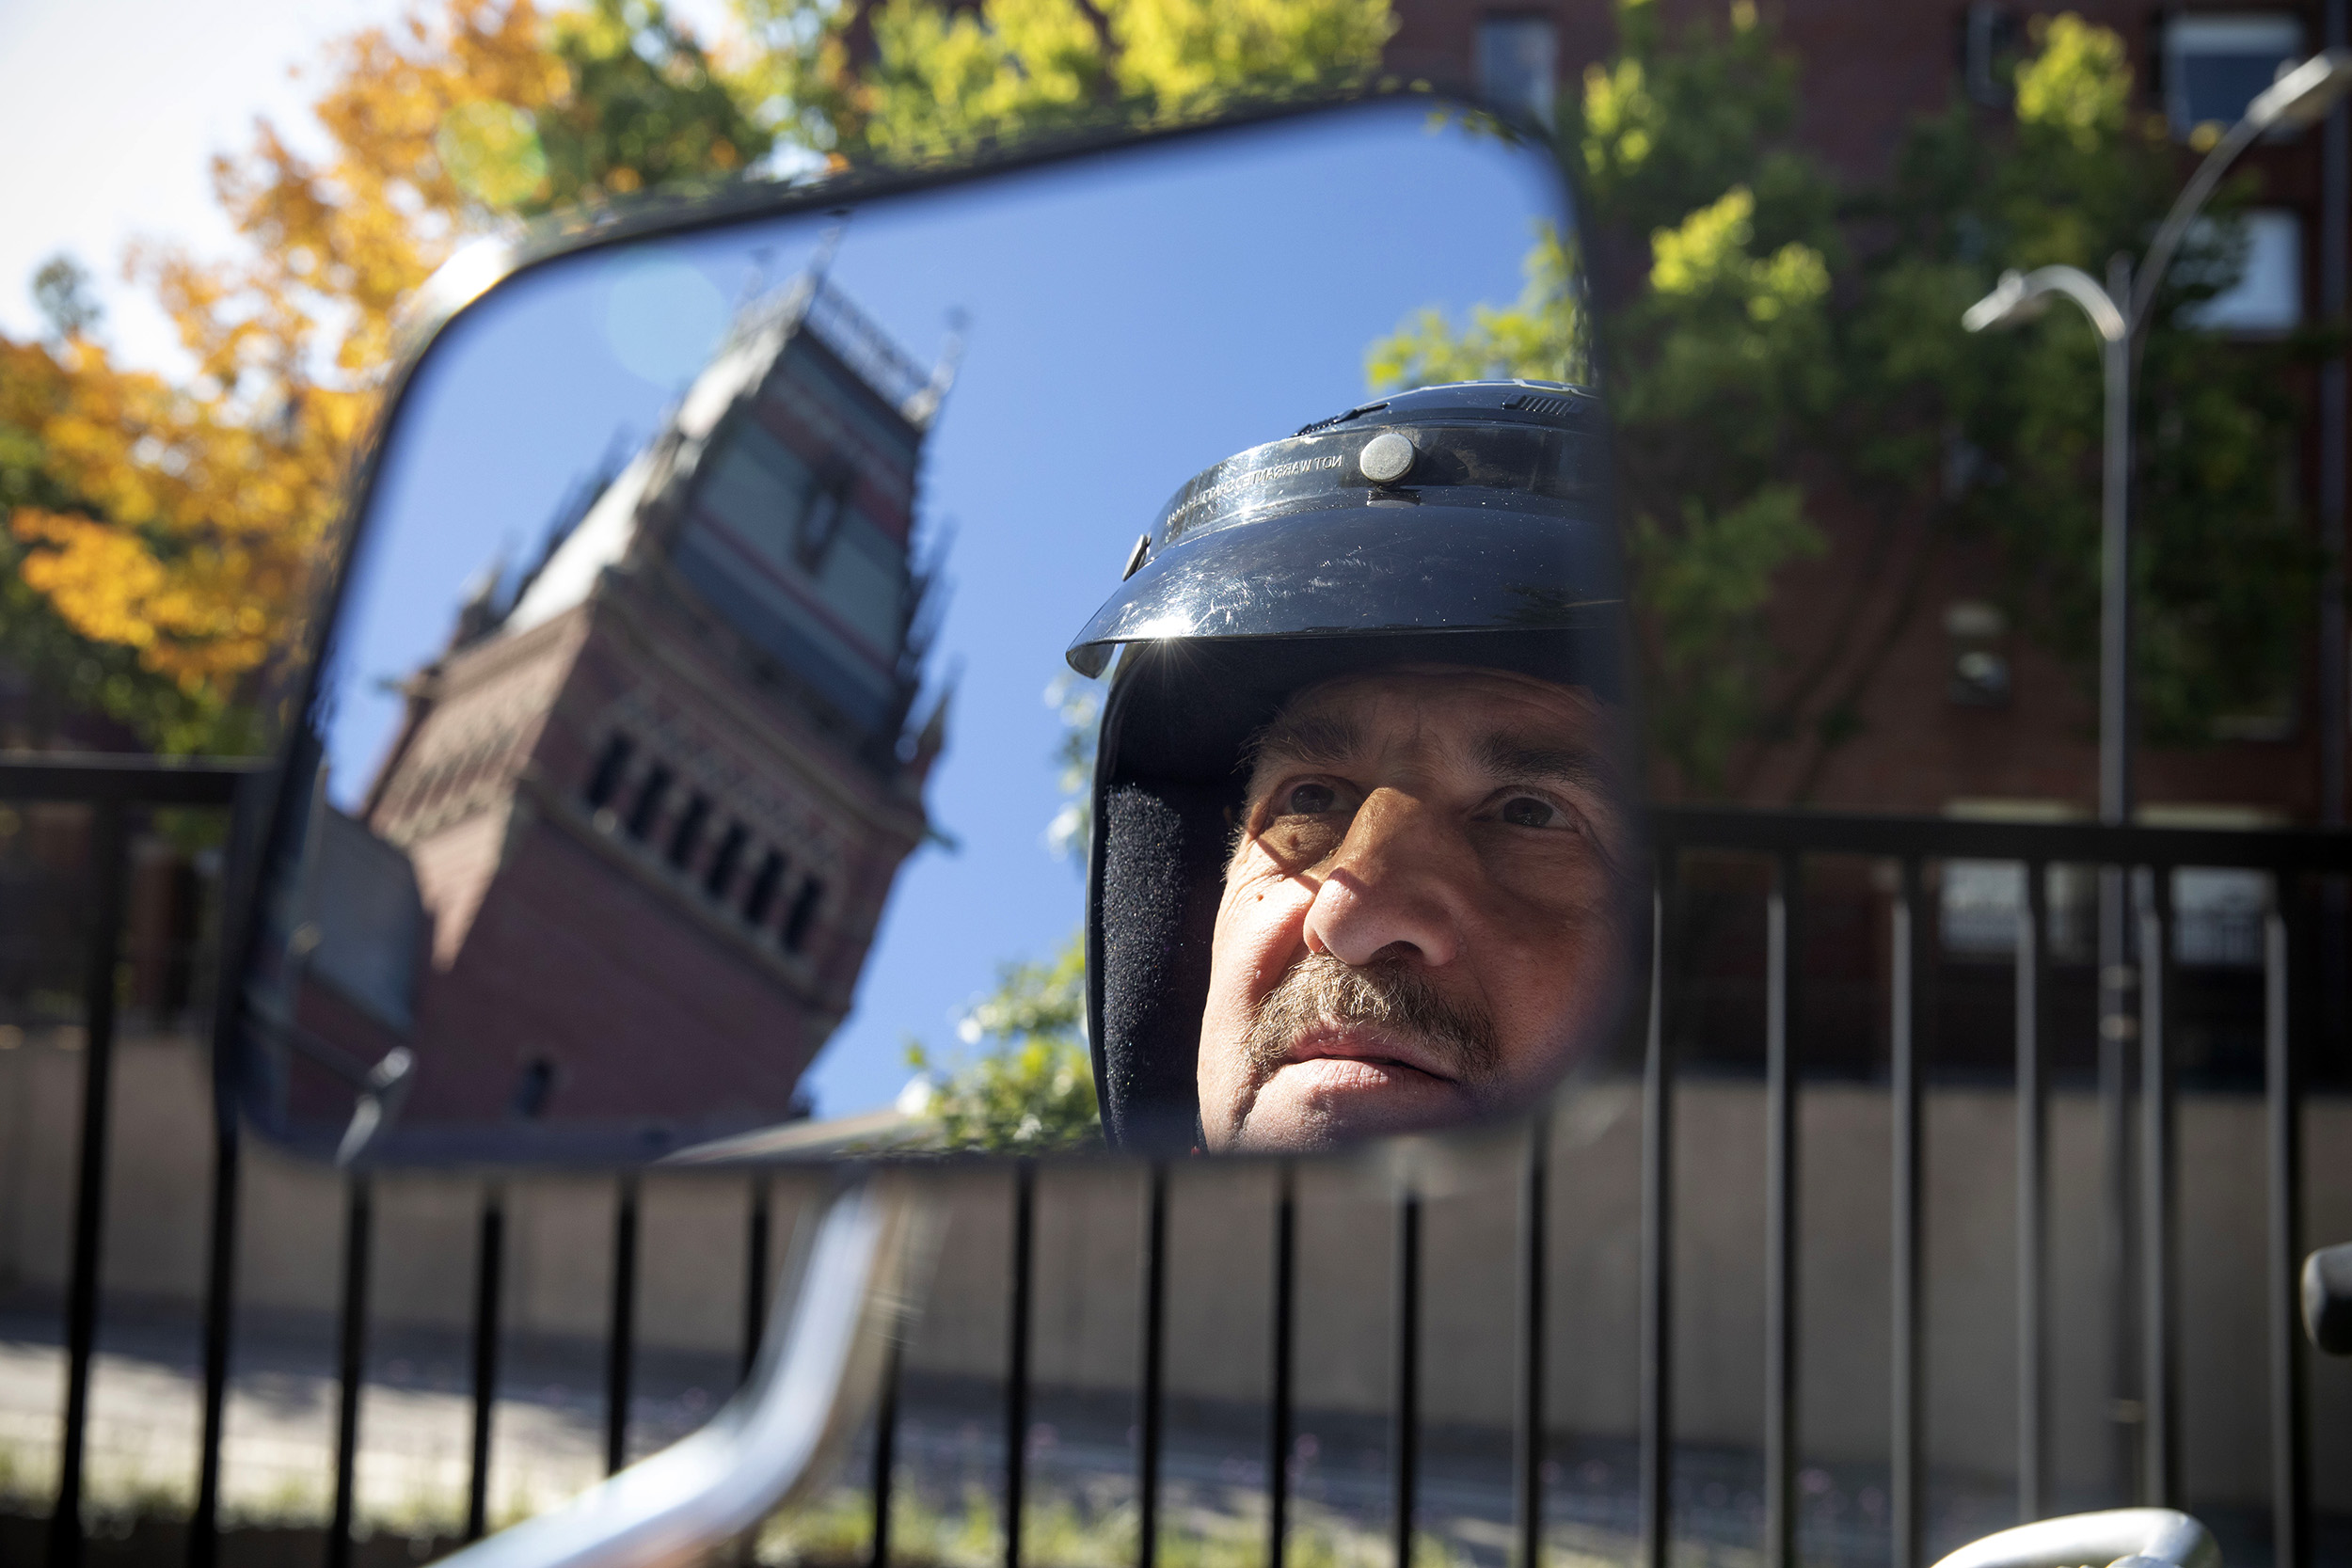 David Seley uses an old three-wheel moped to commute to Annenberg Hall, where he works.